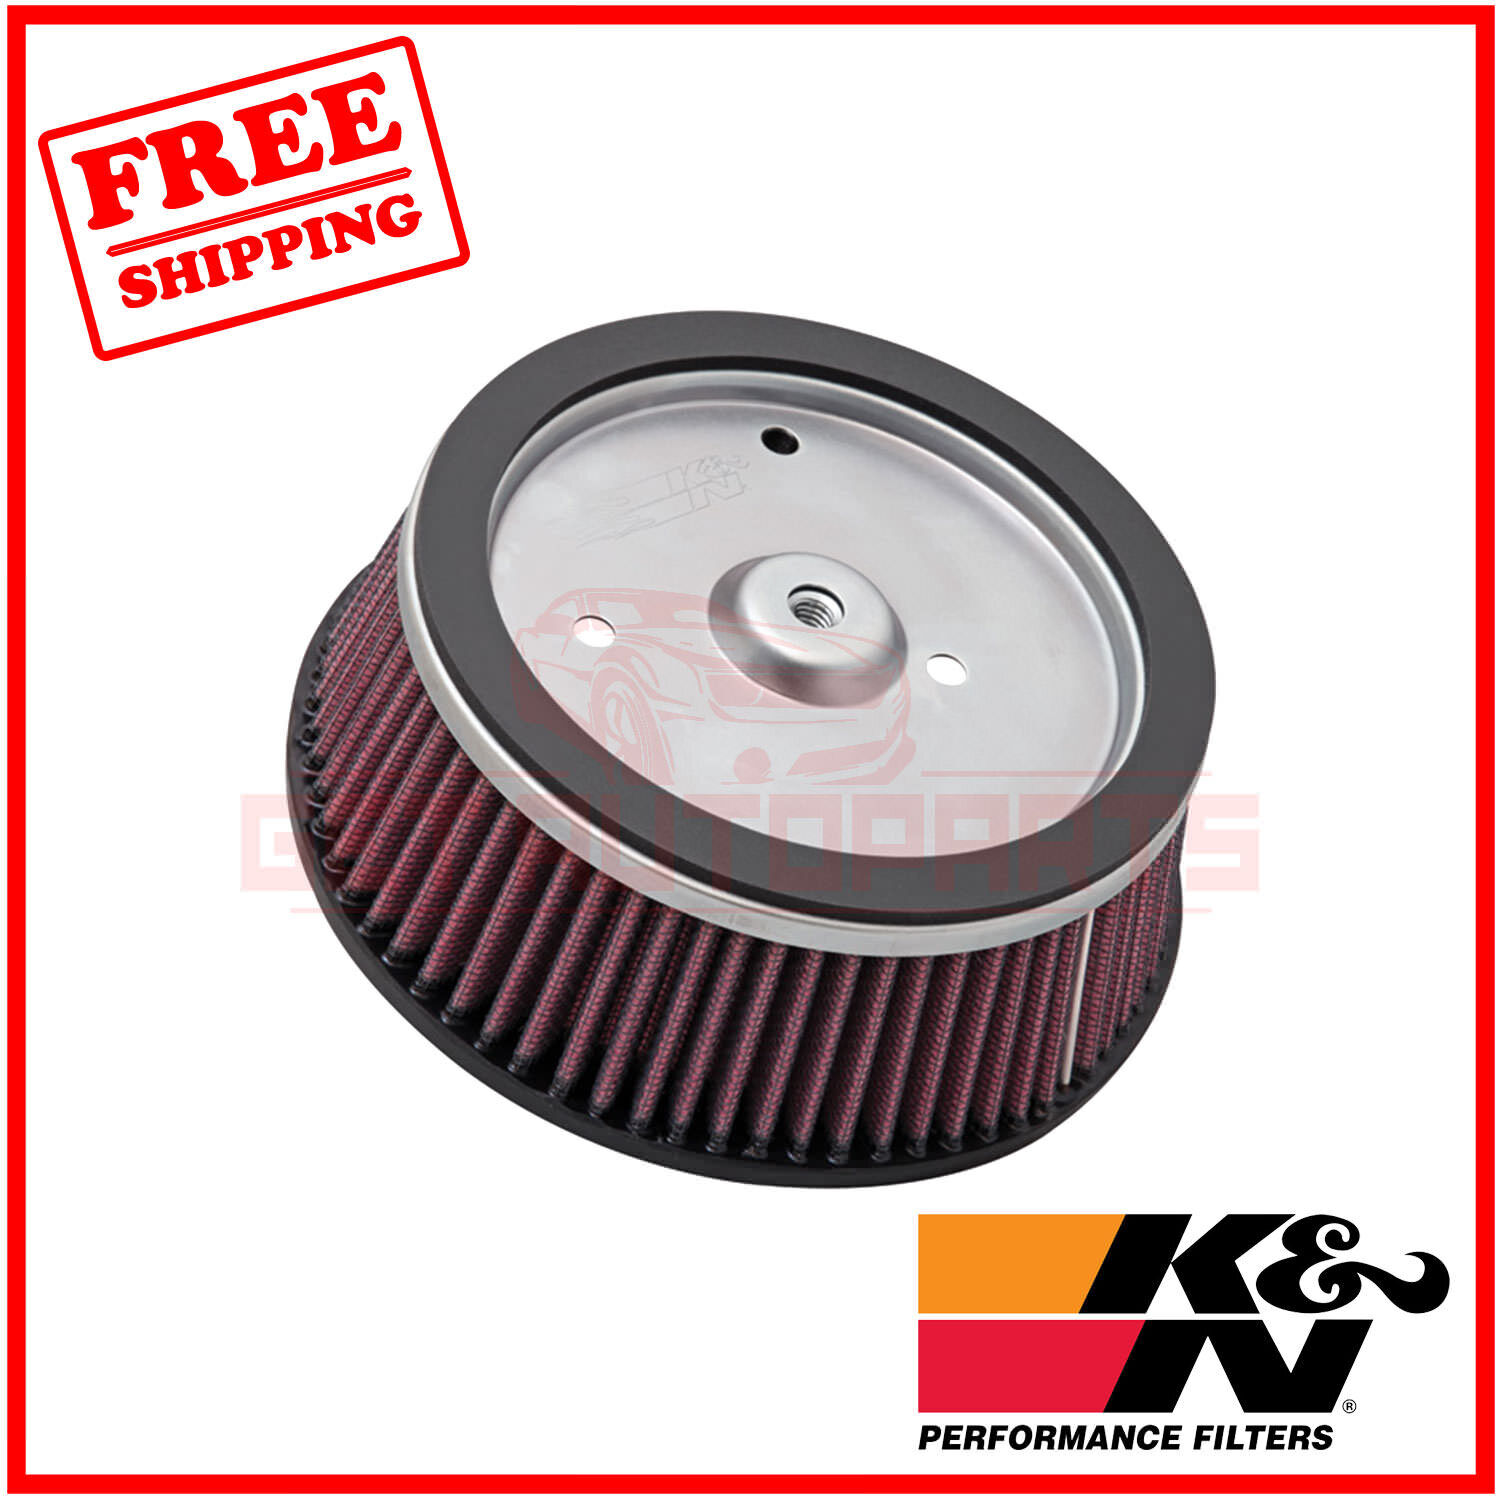 K&N Replacement Air Filter for Harley D. FLHTCUI Electra Glide Ultra 1999-2006